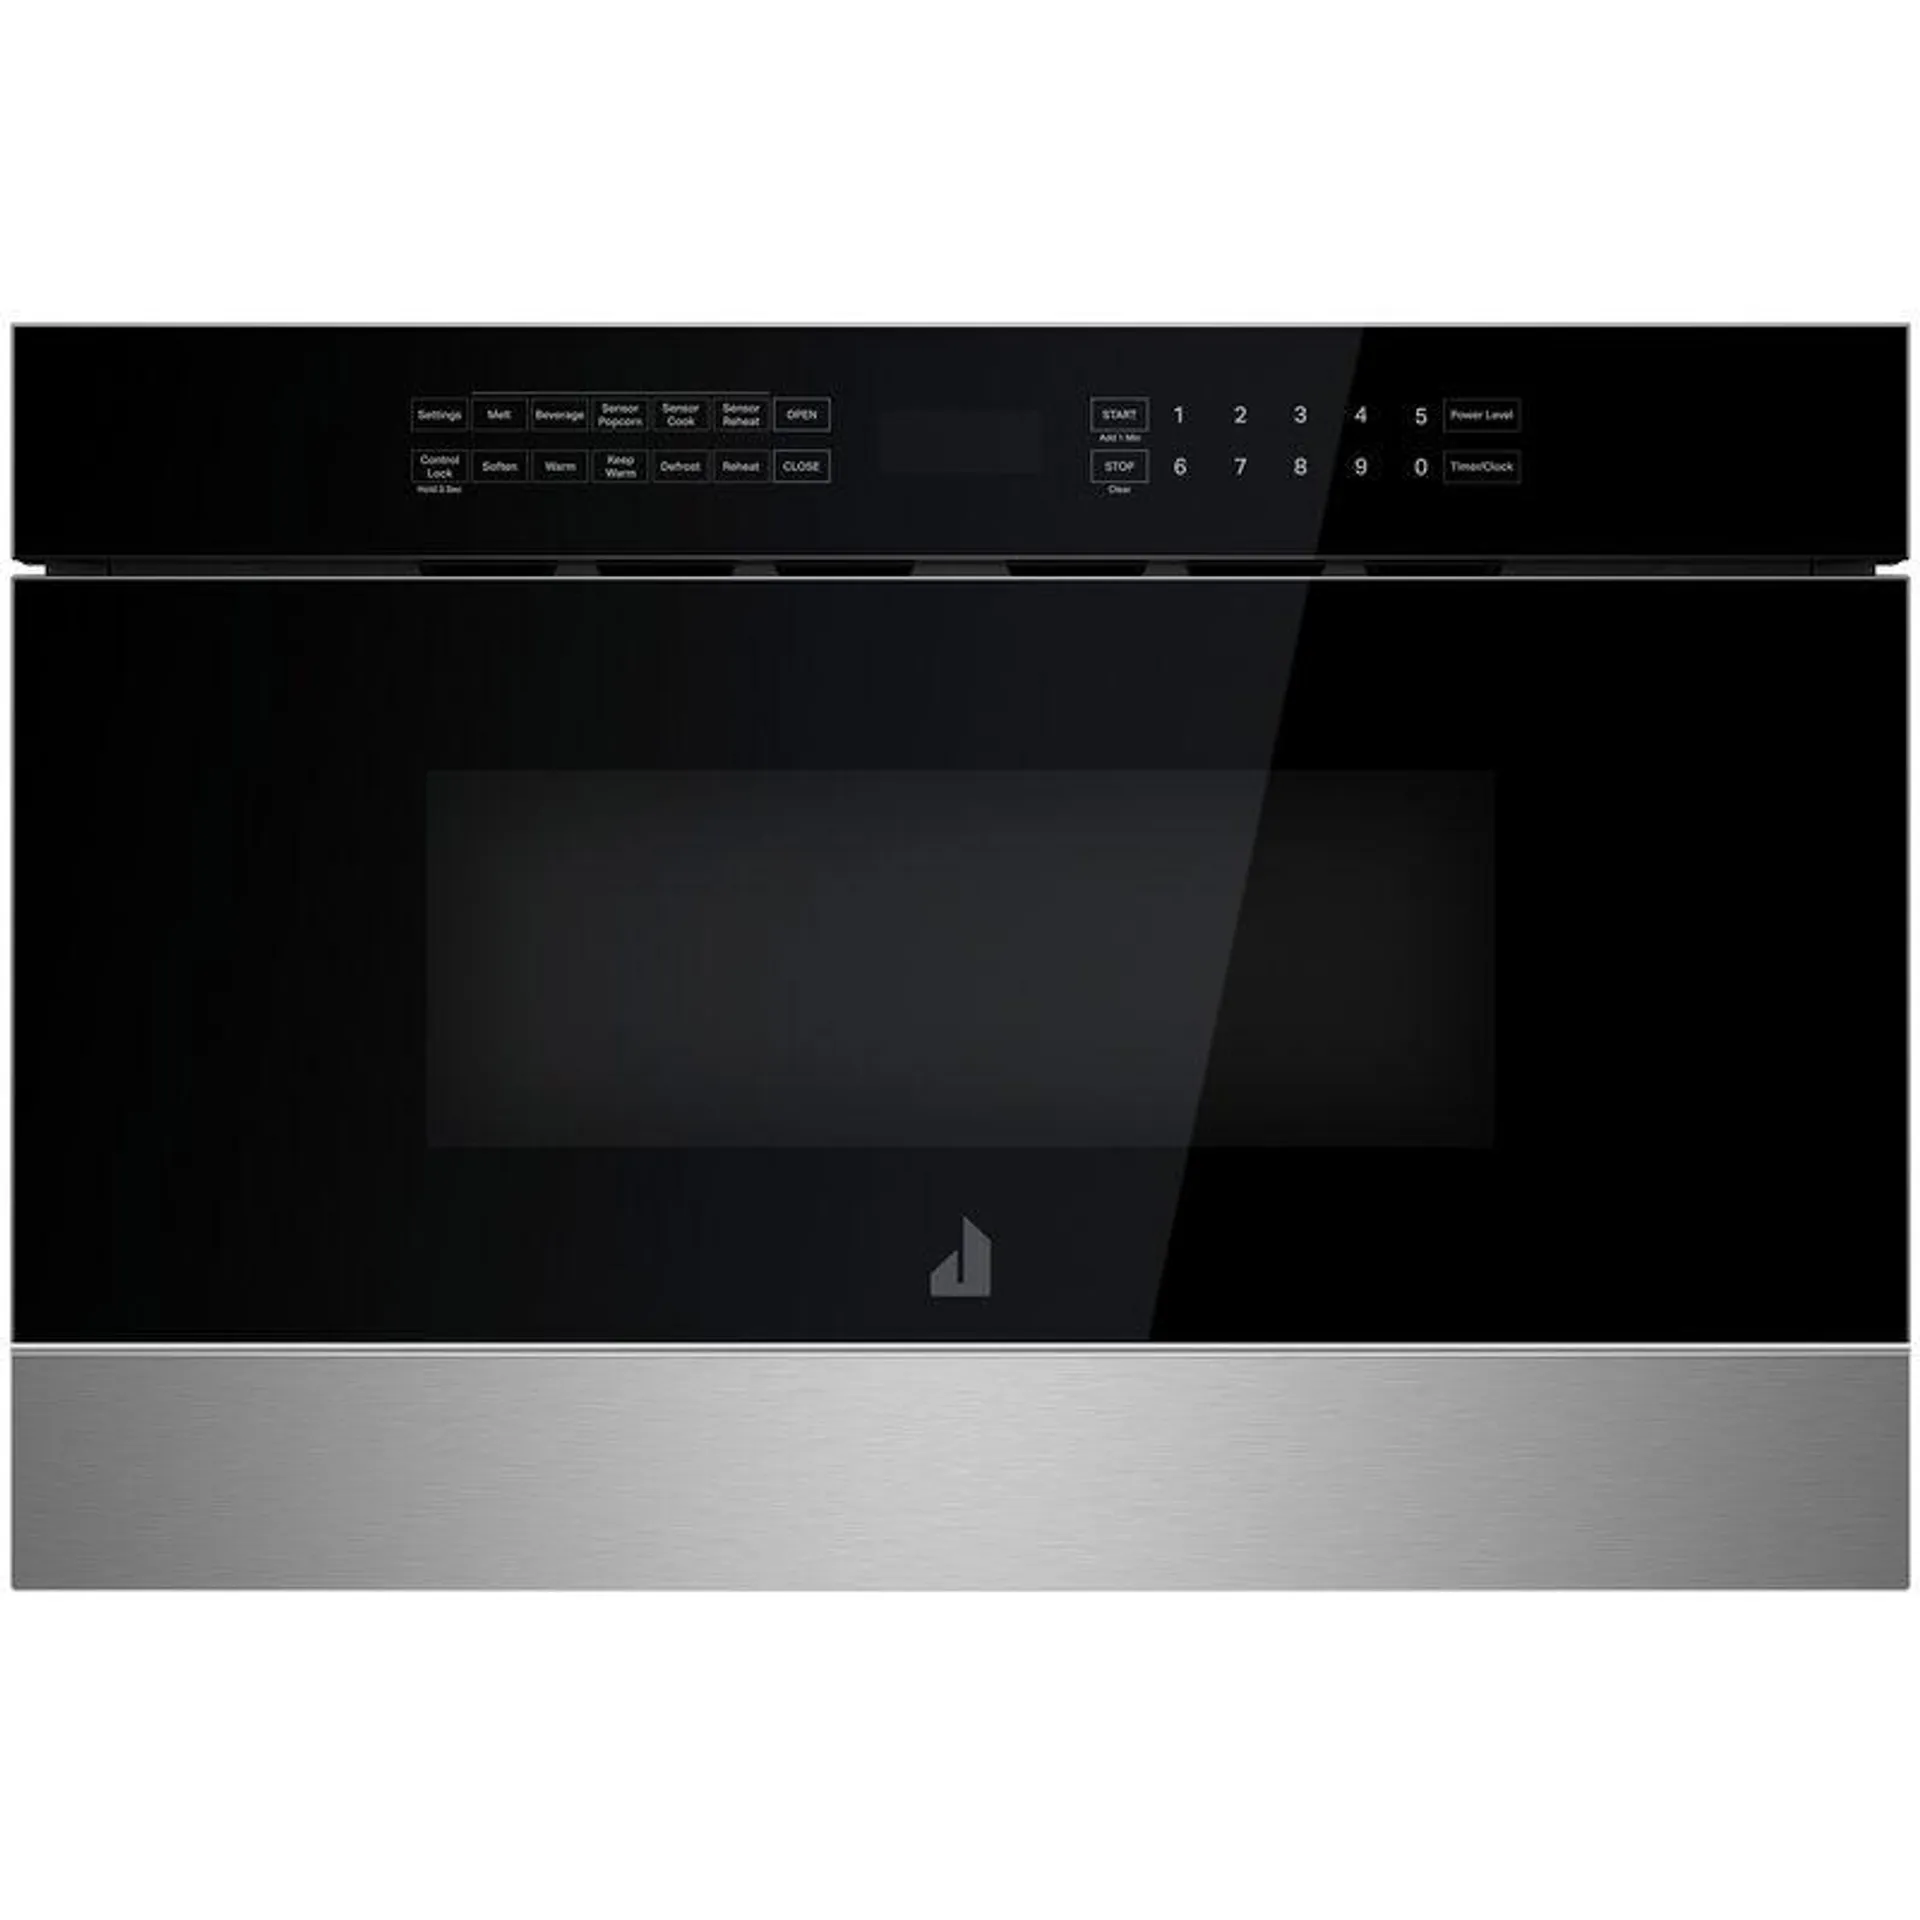 JennAir Noir Series 24" 1.2 Cu. Ft. Built-In Microwave with 11 Power Levels & Sensor Cooking Controls - Stainless Steel